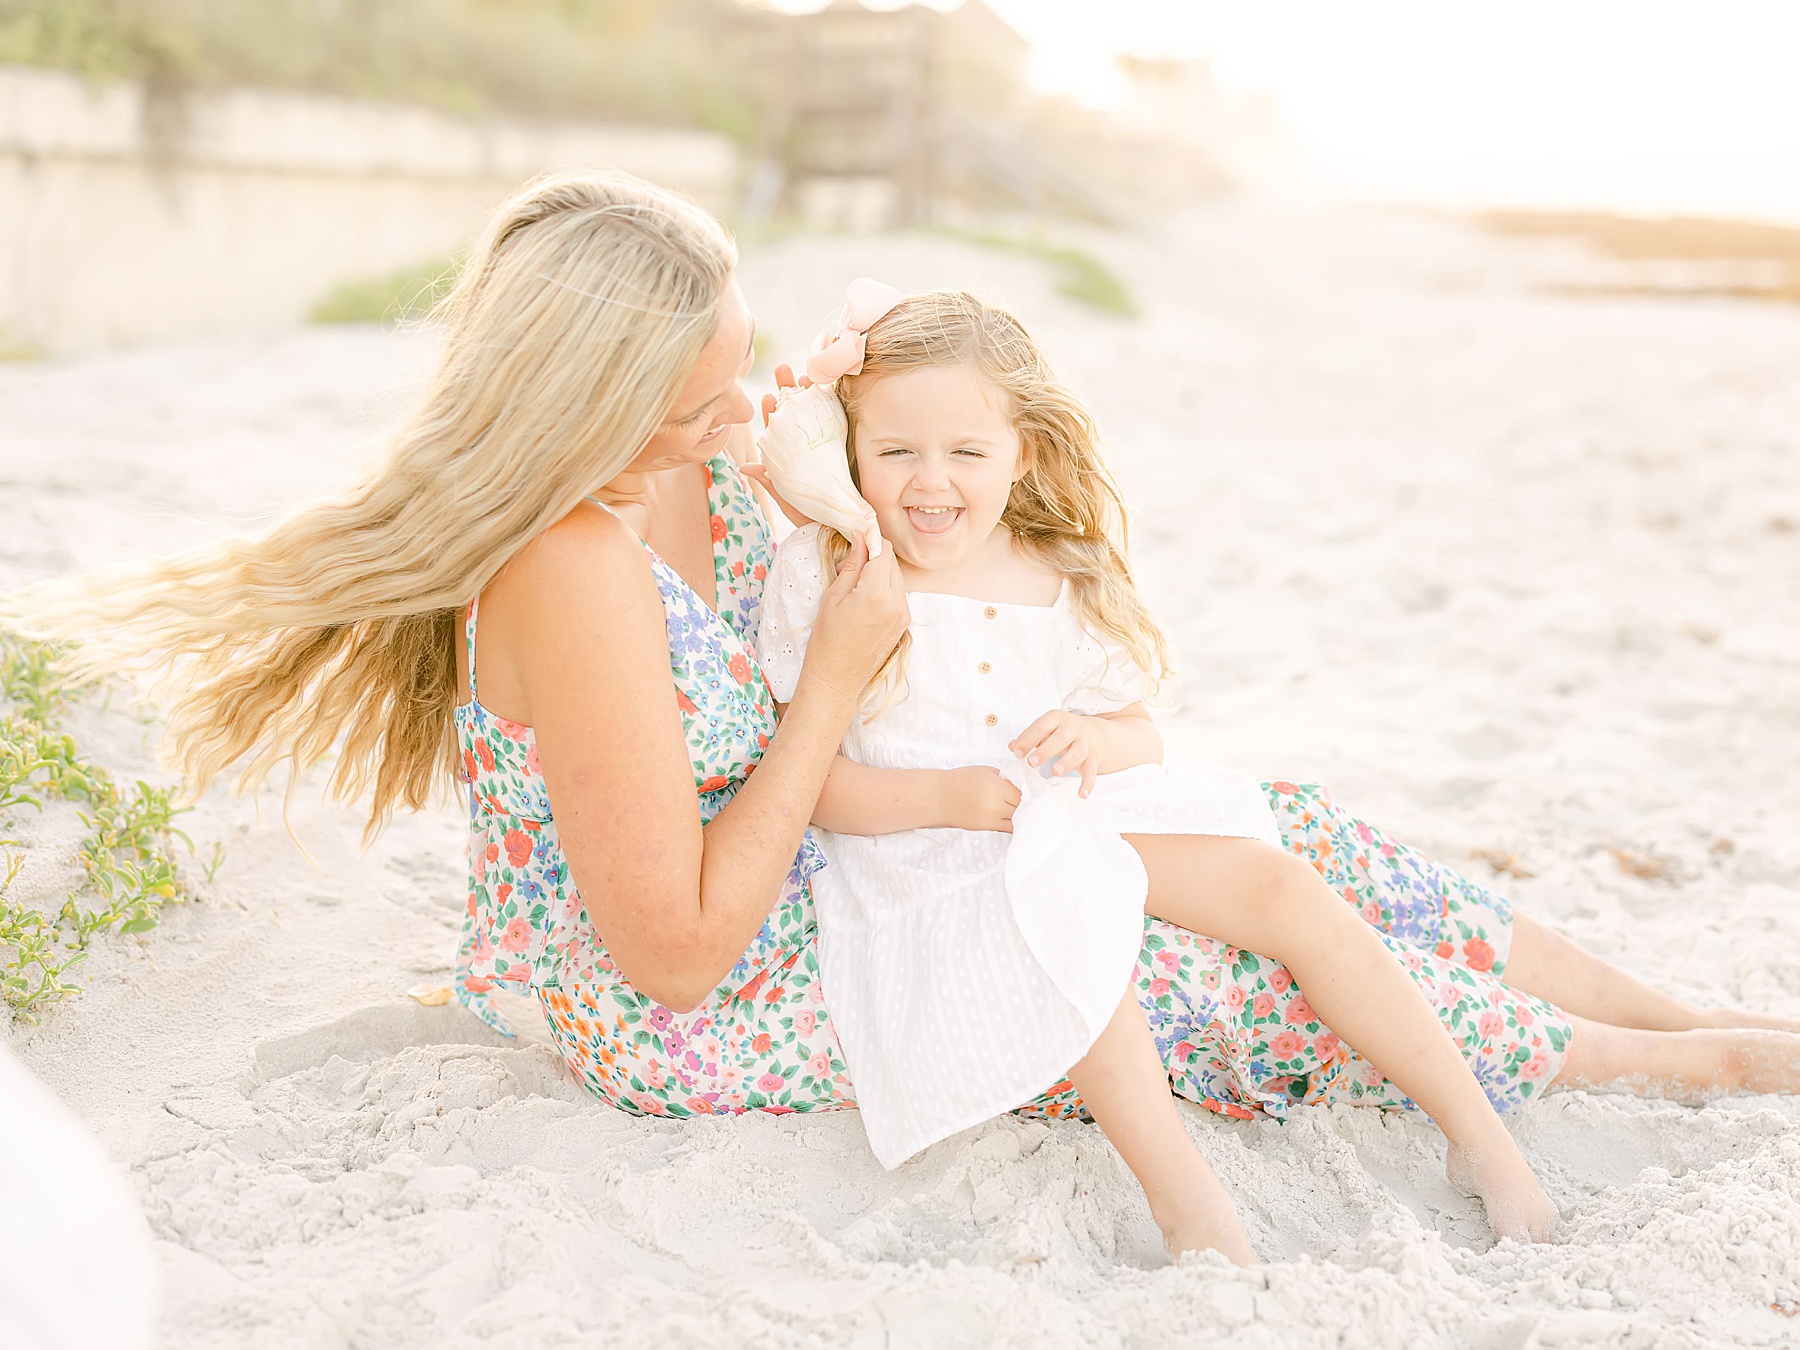 mom and girl laughing holding seashell on the beach in dresses